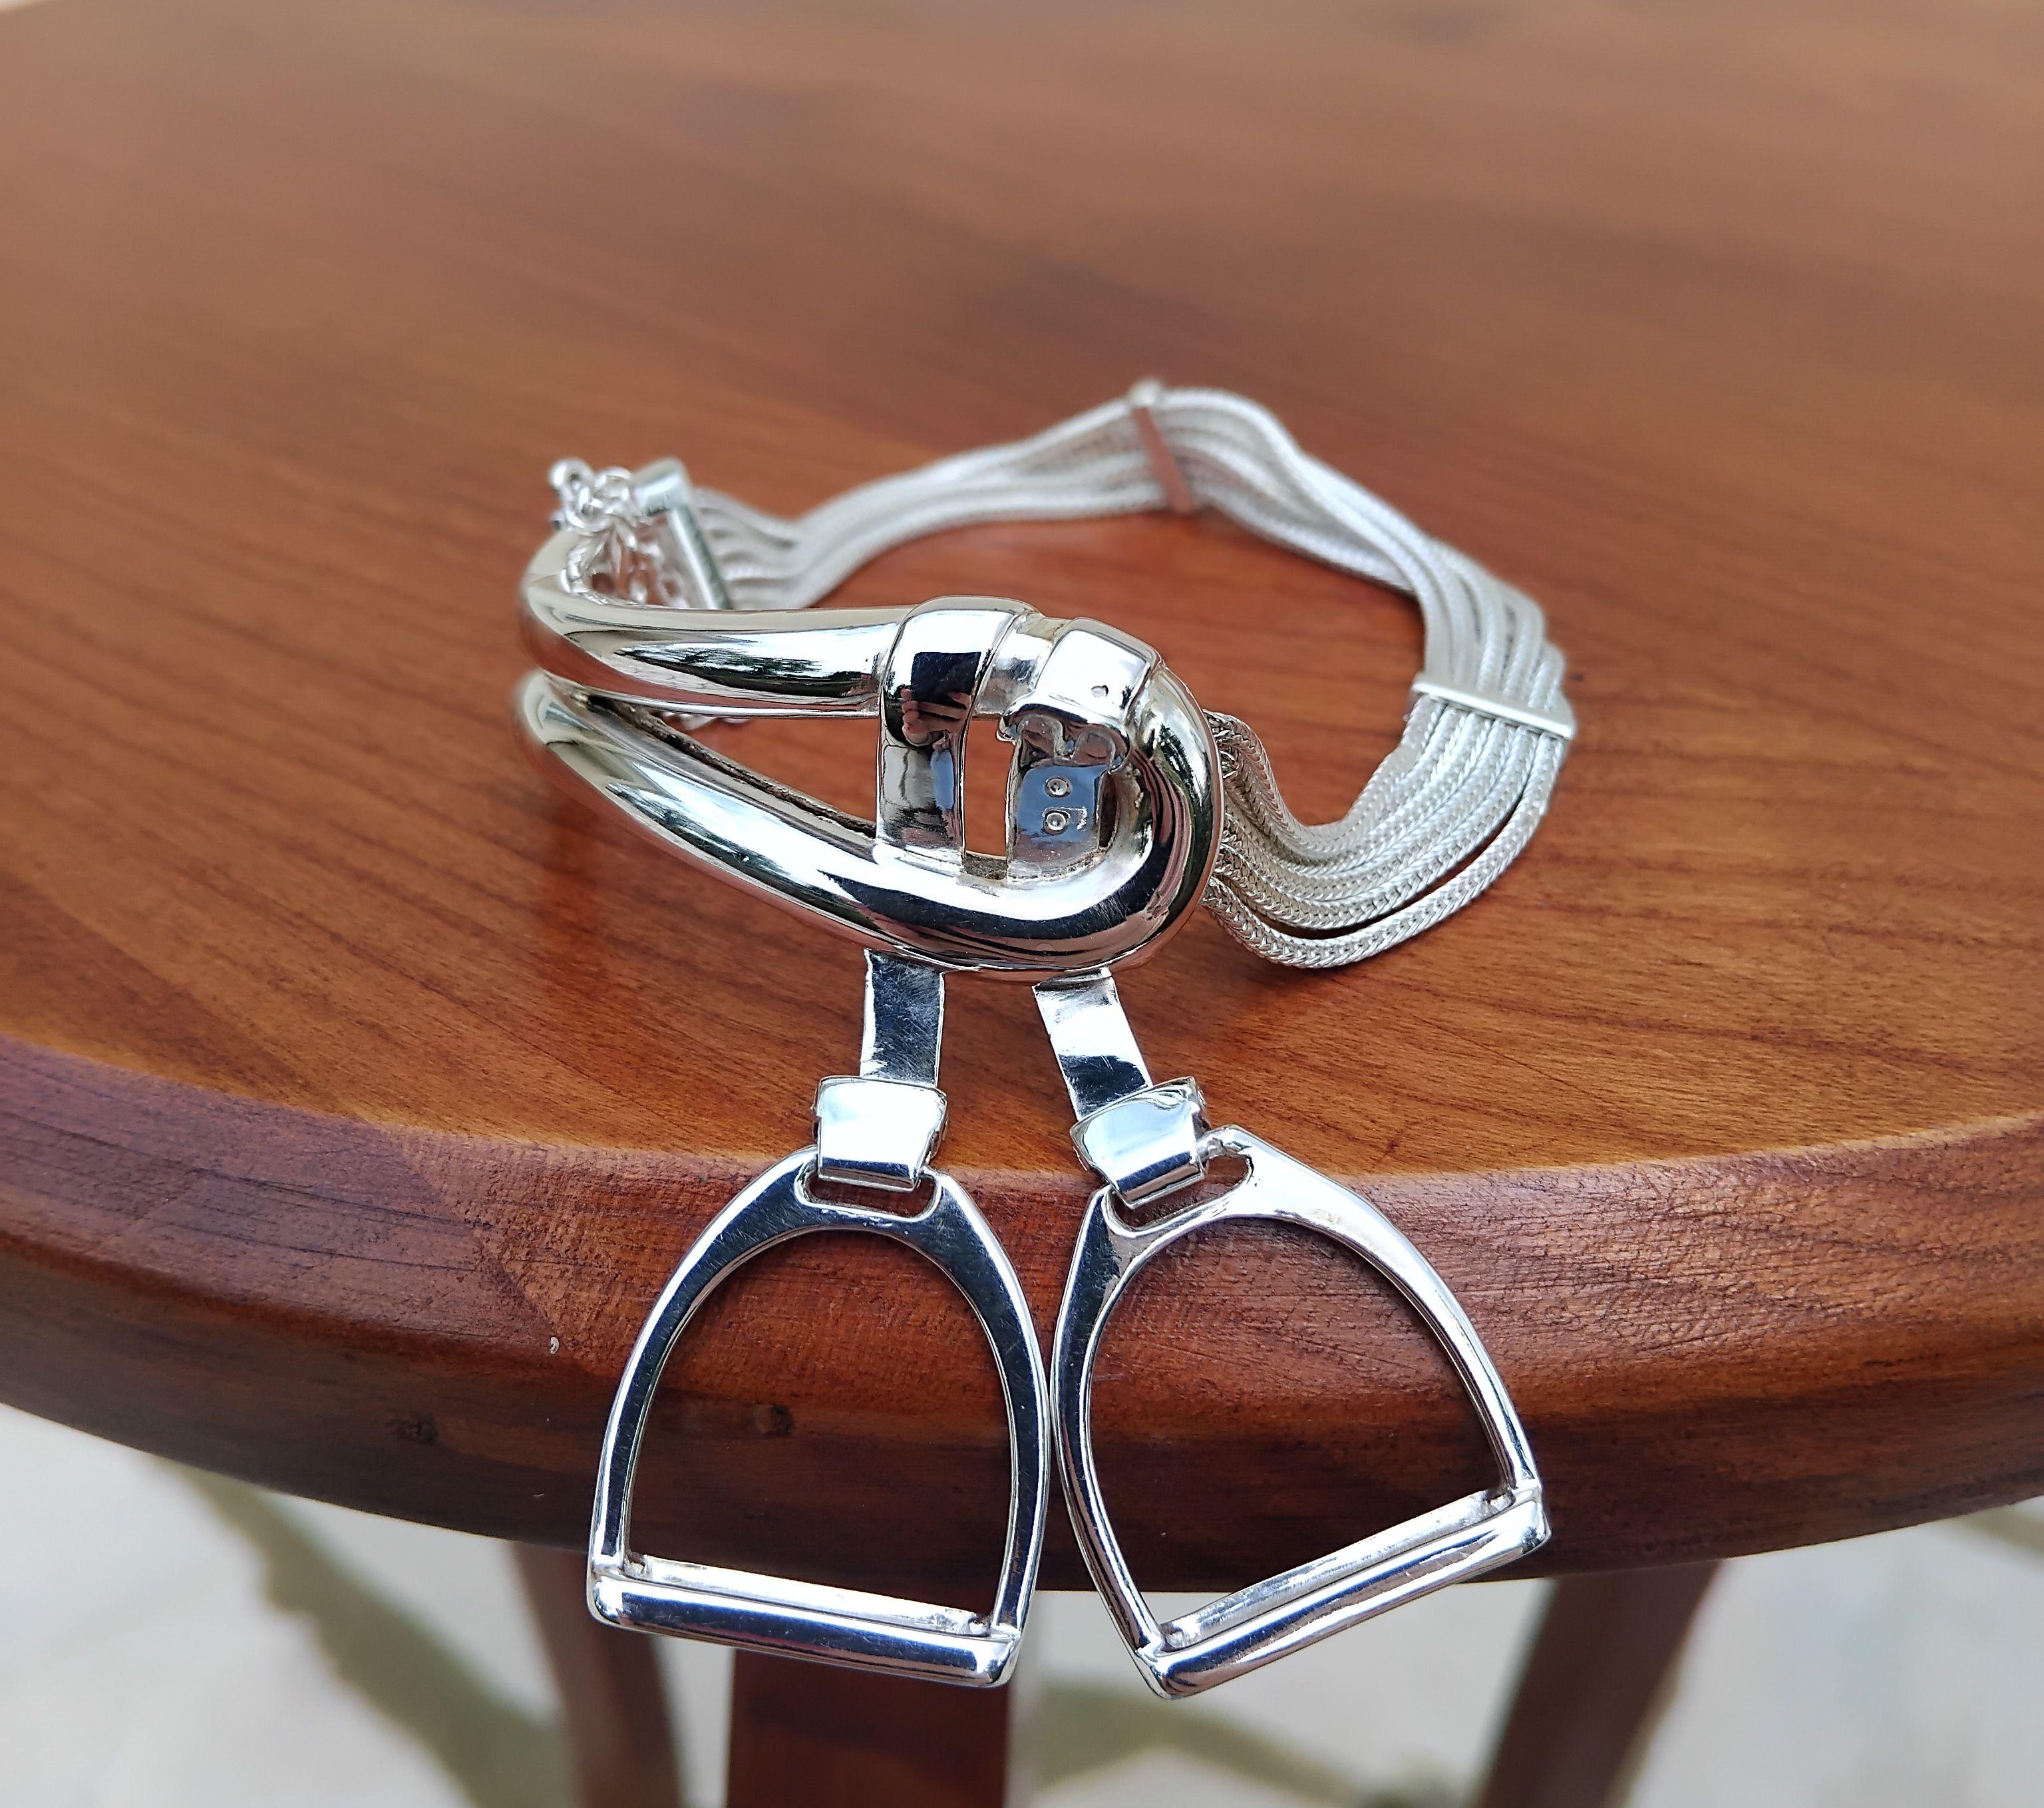 Exceptional Hermès Bracelet Equestrian Theme Stirrups Charms in Silver Texas  For Sale 14